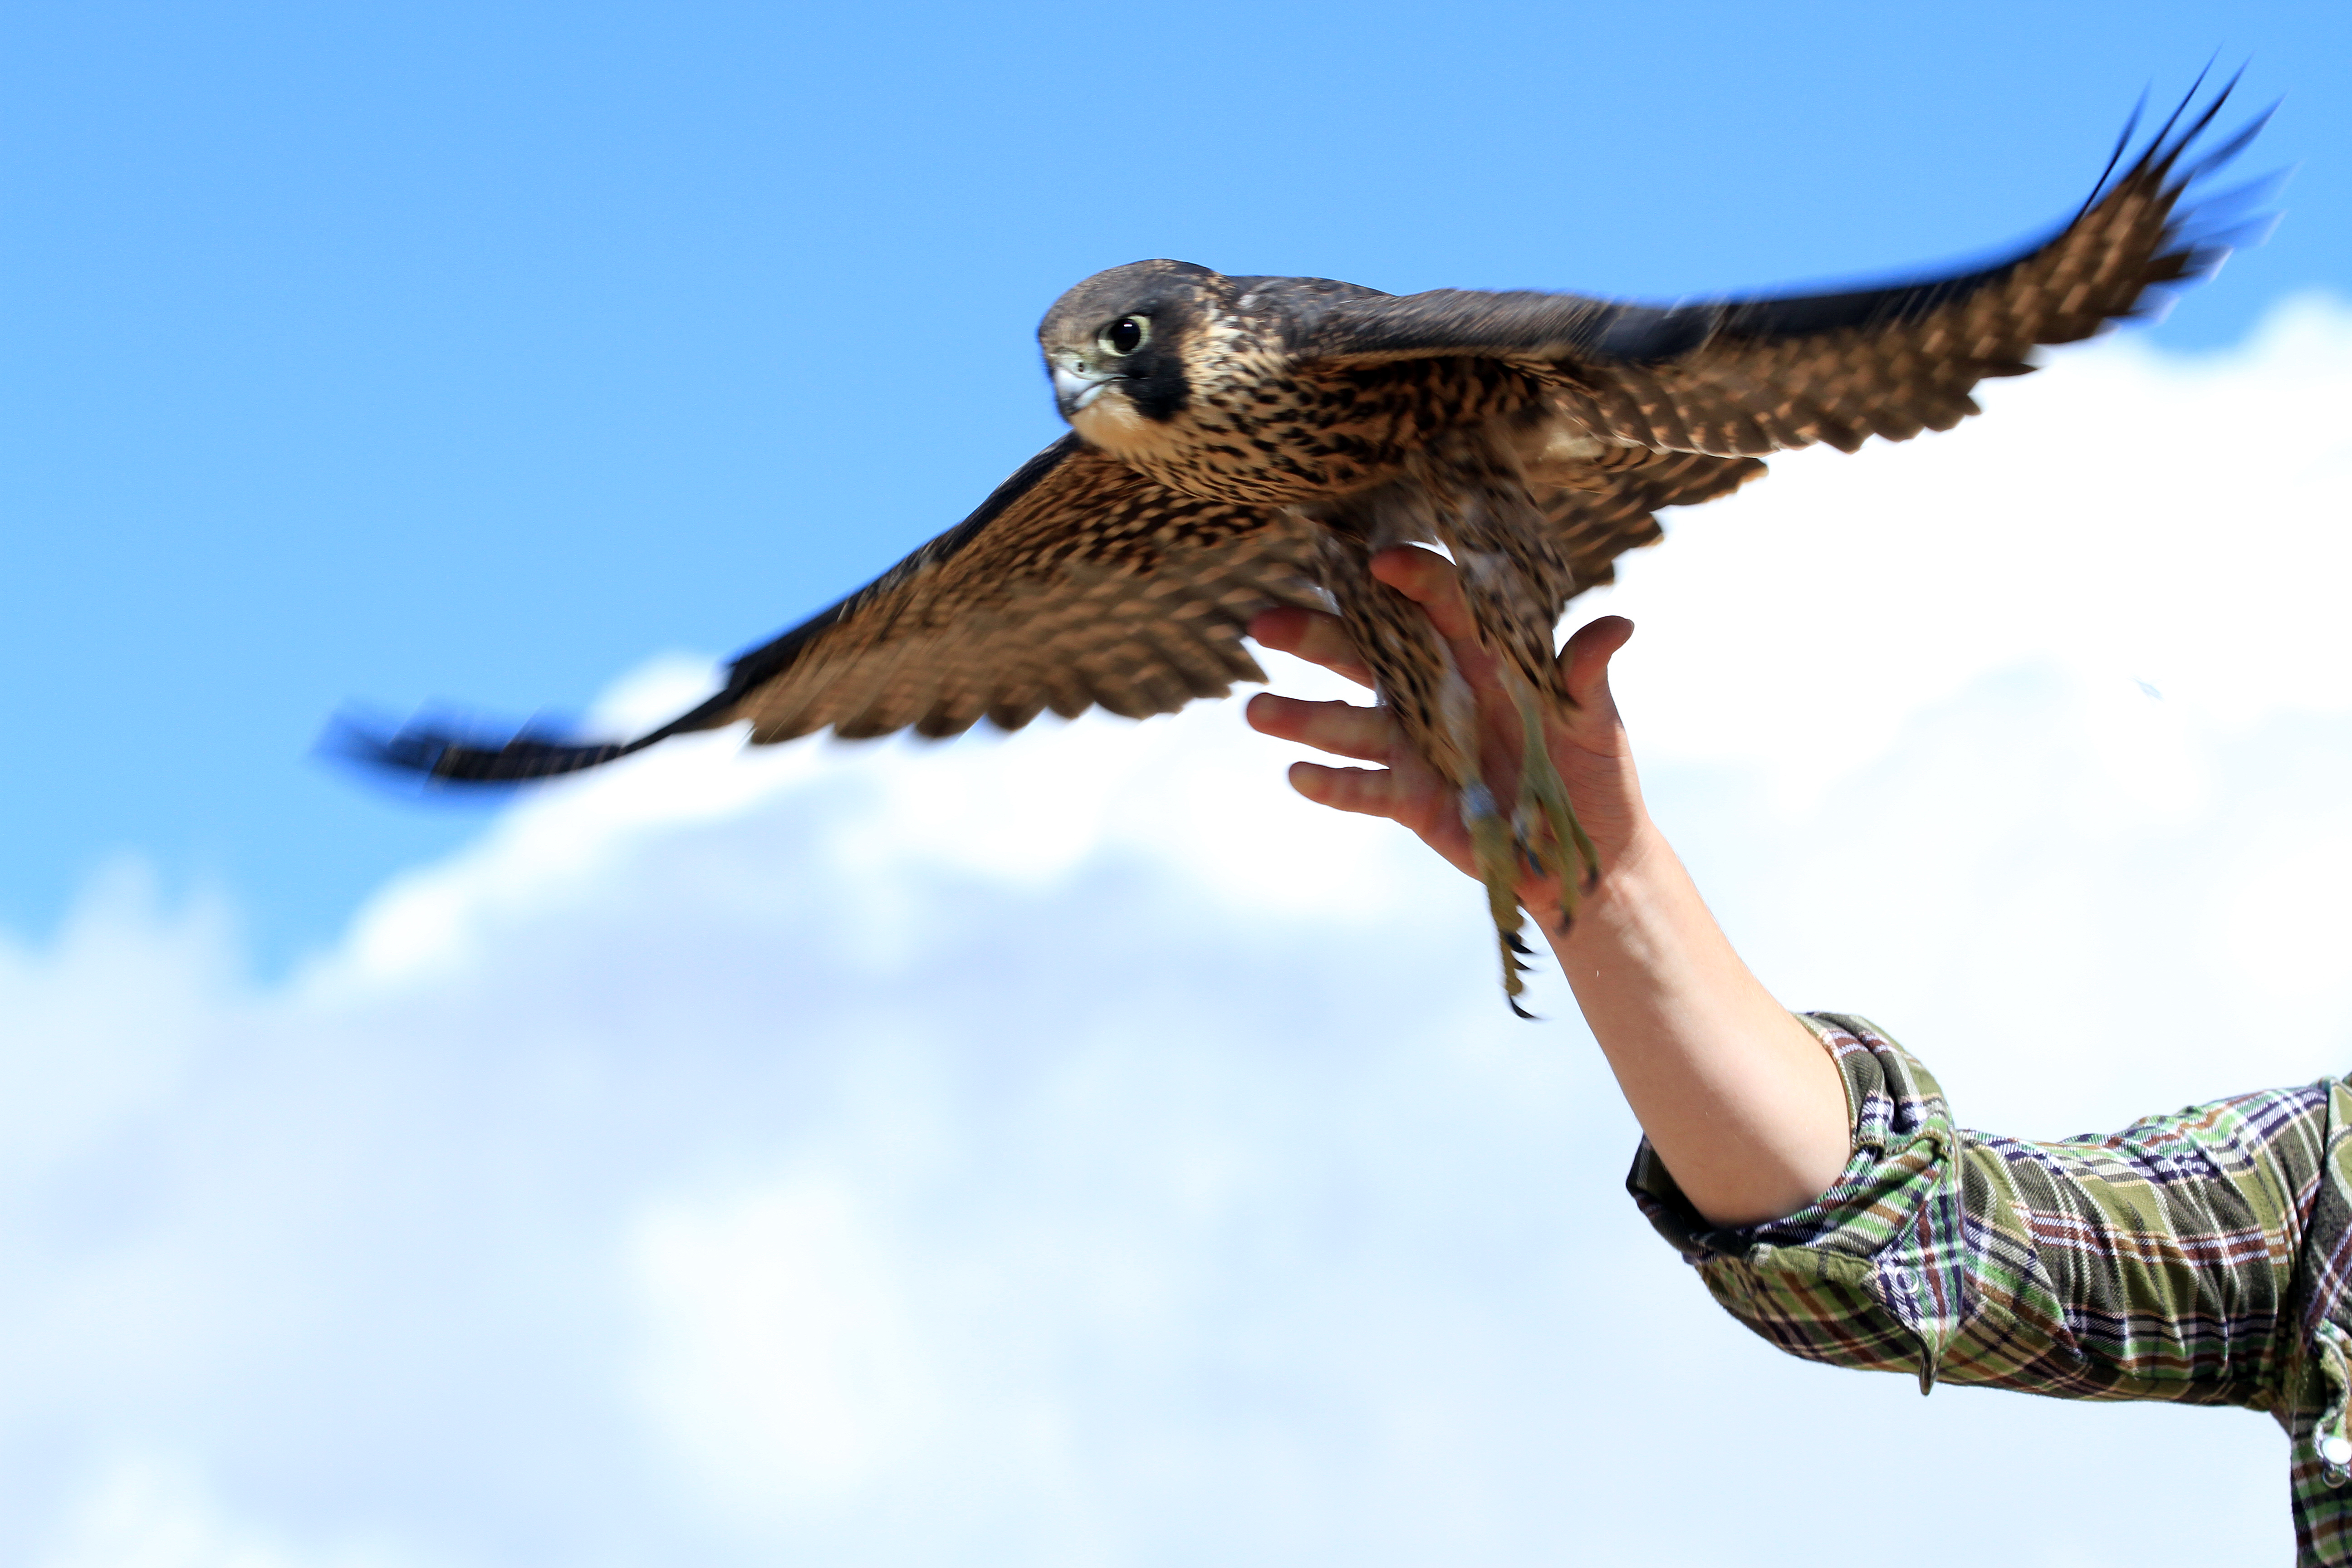 a biologists hand is seen held open to release a peregrine falcon. the falcon flies away with wings spread